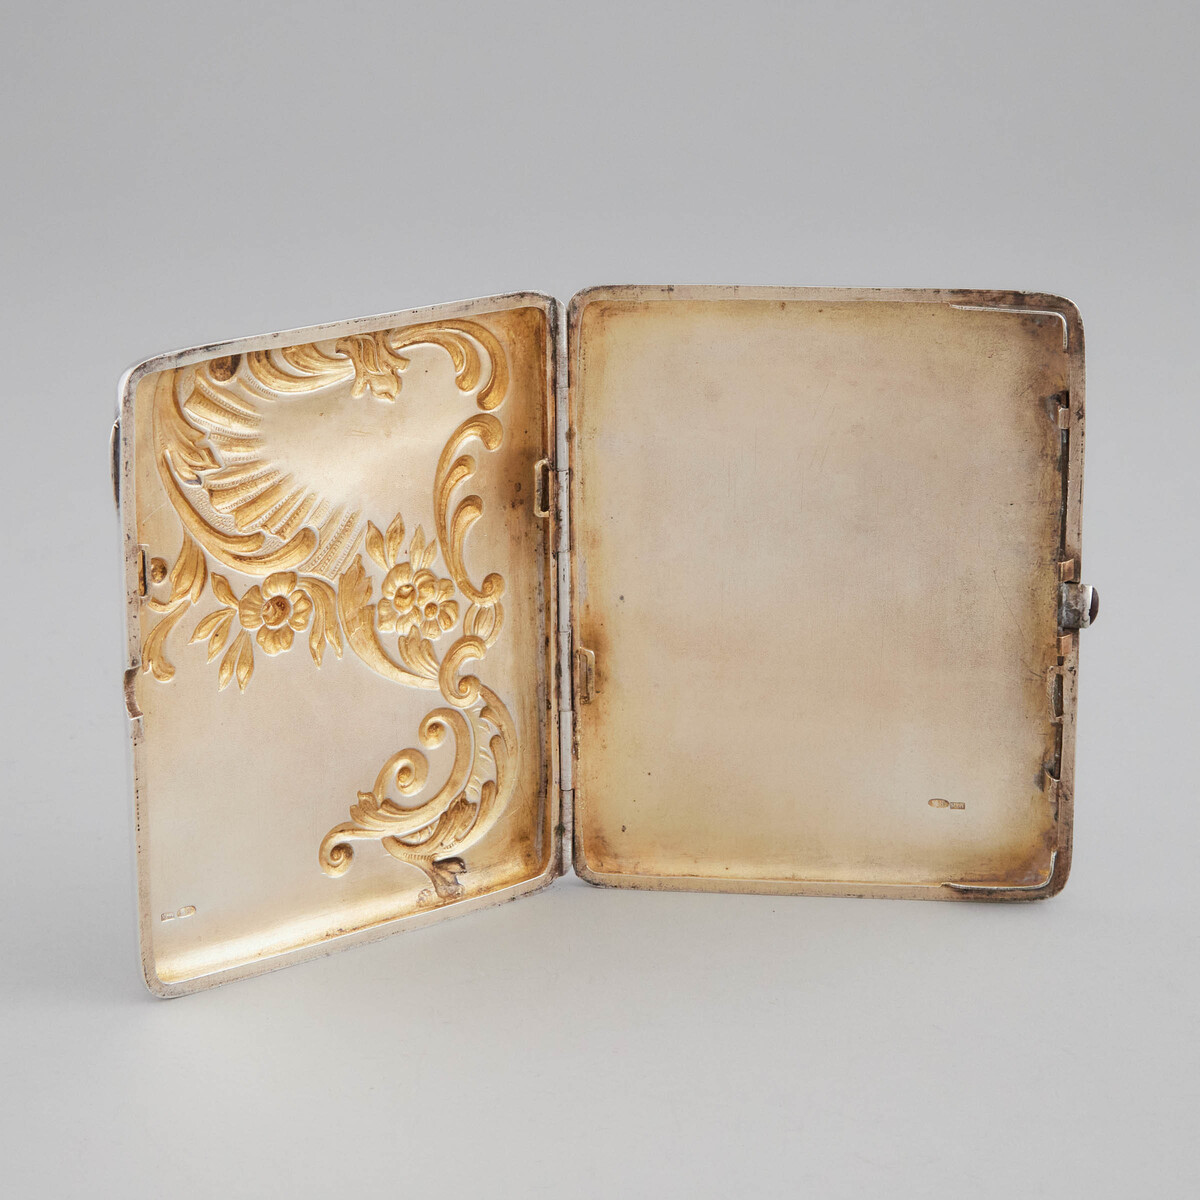 Russian Repoussé Silver Rectangular Cheroot Case, Moscow, c.1908-17, 4.7 x 3.9 in — 12 x 10 cm - Image 2 of 2